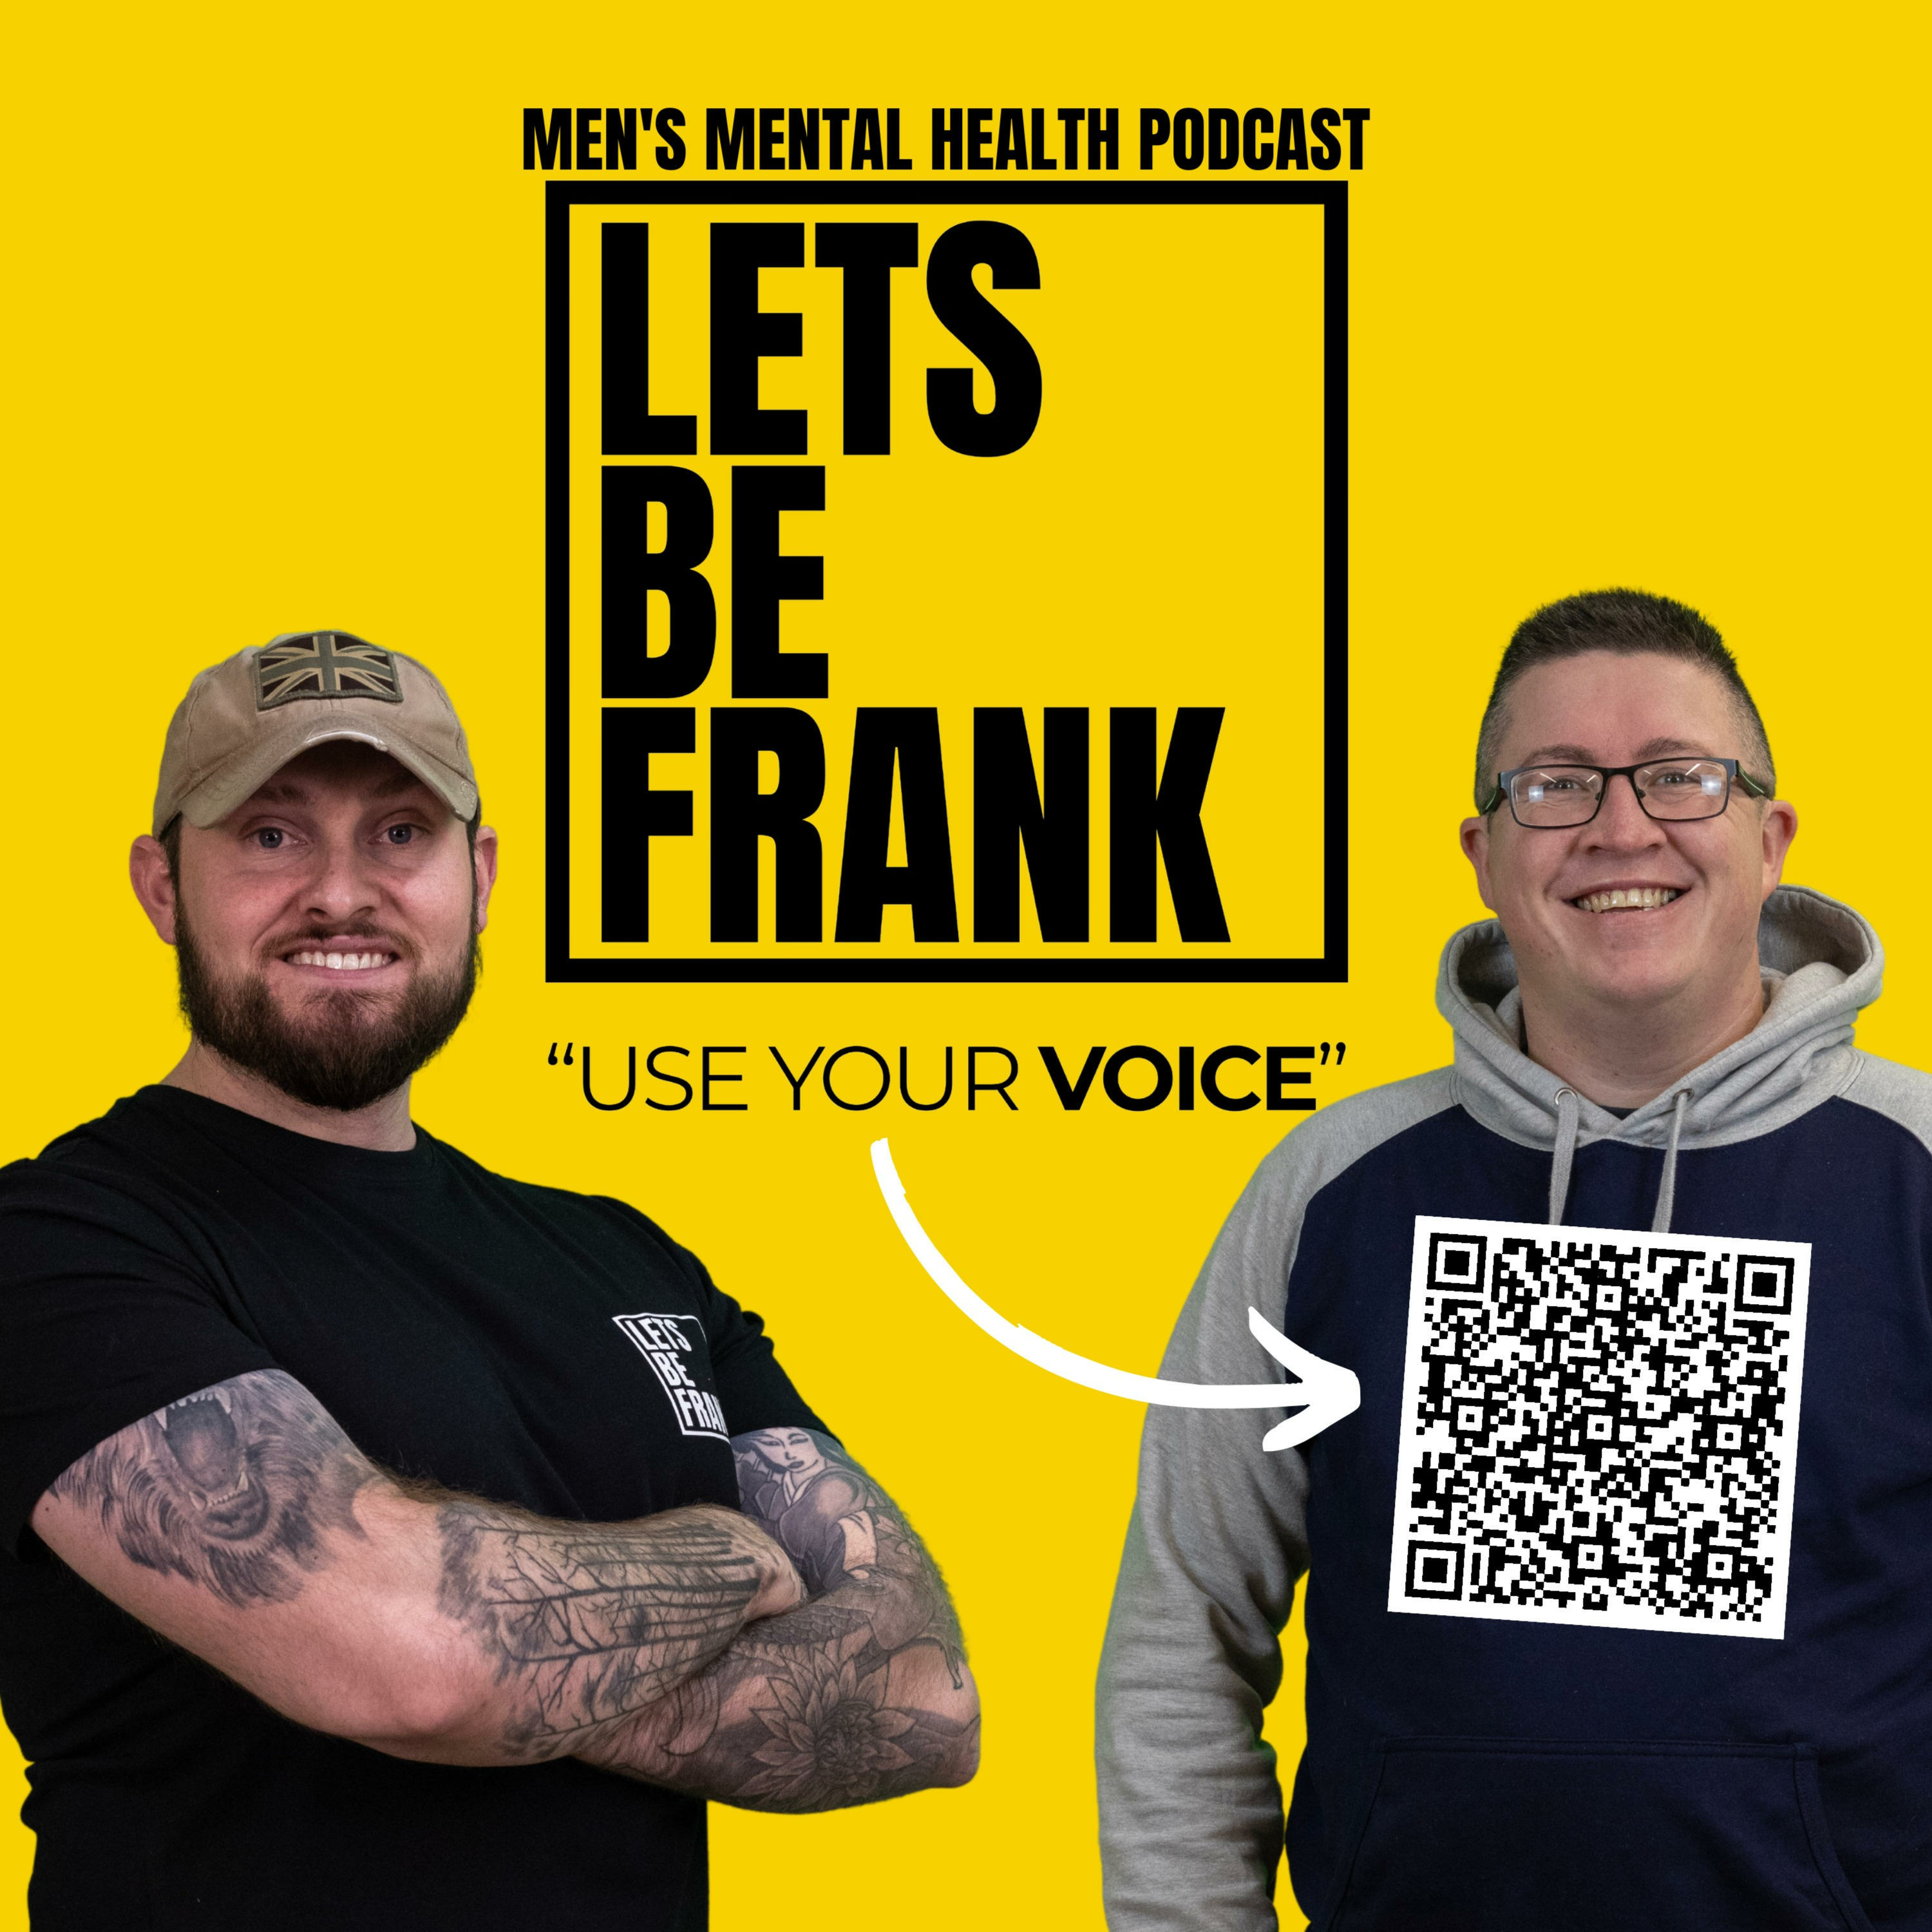 Fresh update on "two minutes" discussed on Lets Be Frank Podcast - Men's Mental Health